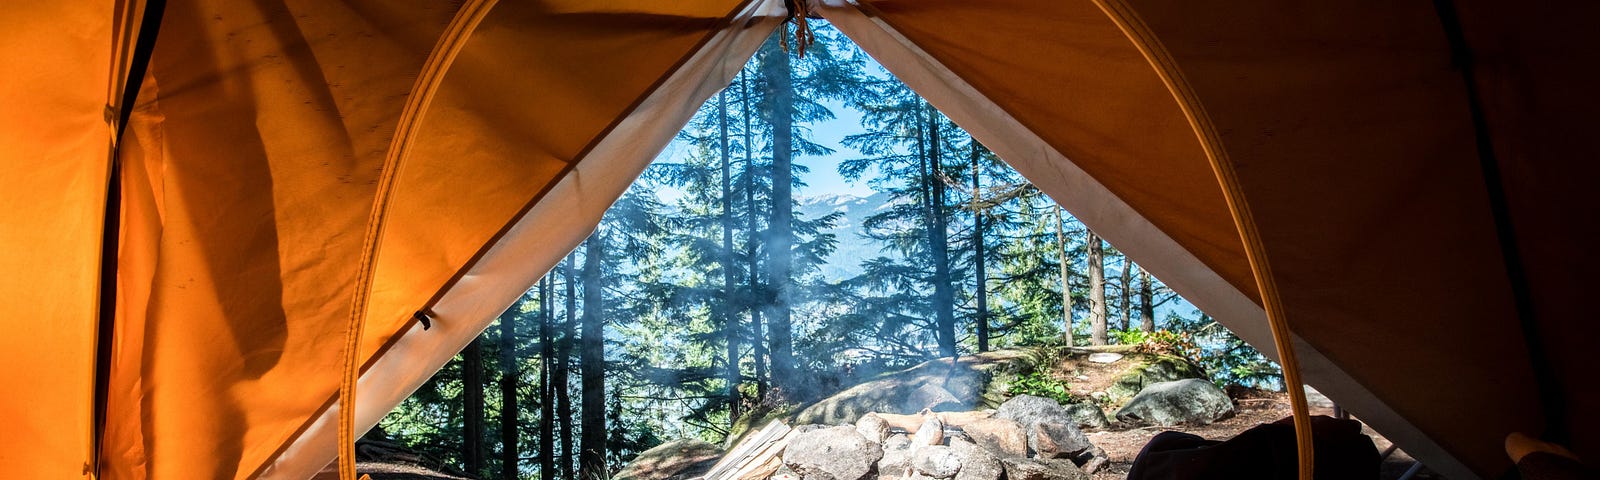 How To Get Ready For Your First Night In A Tent